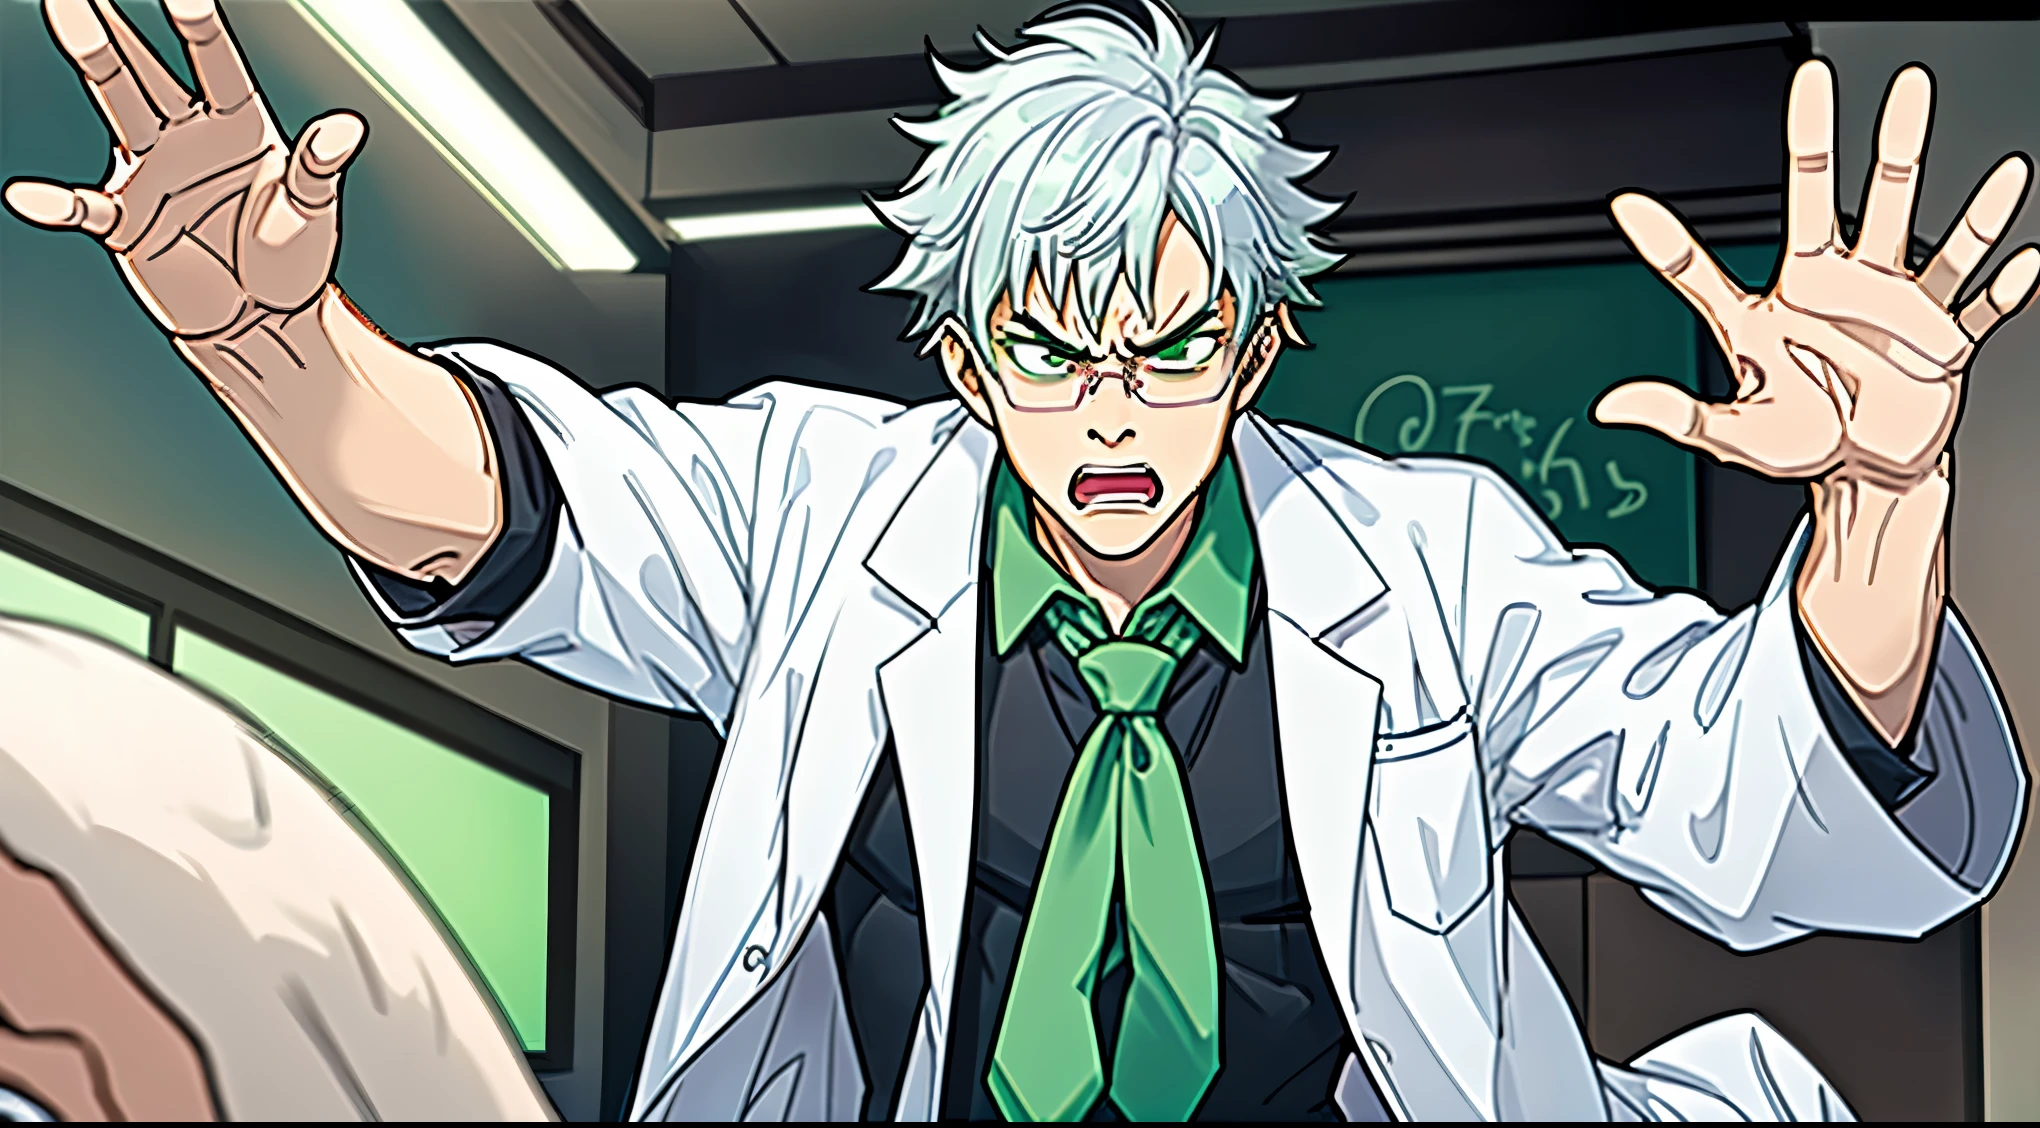 Silver-haired guy wearing medical glasses, wearing a white lab coat and black and pink shirt with a green tie, he is furious, waving his arms in a dynamic movement of anger, his face expressions showing anger